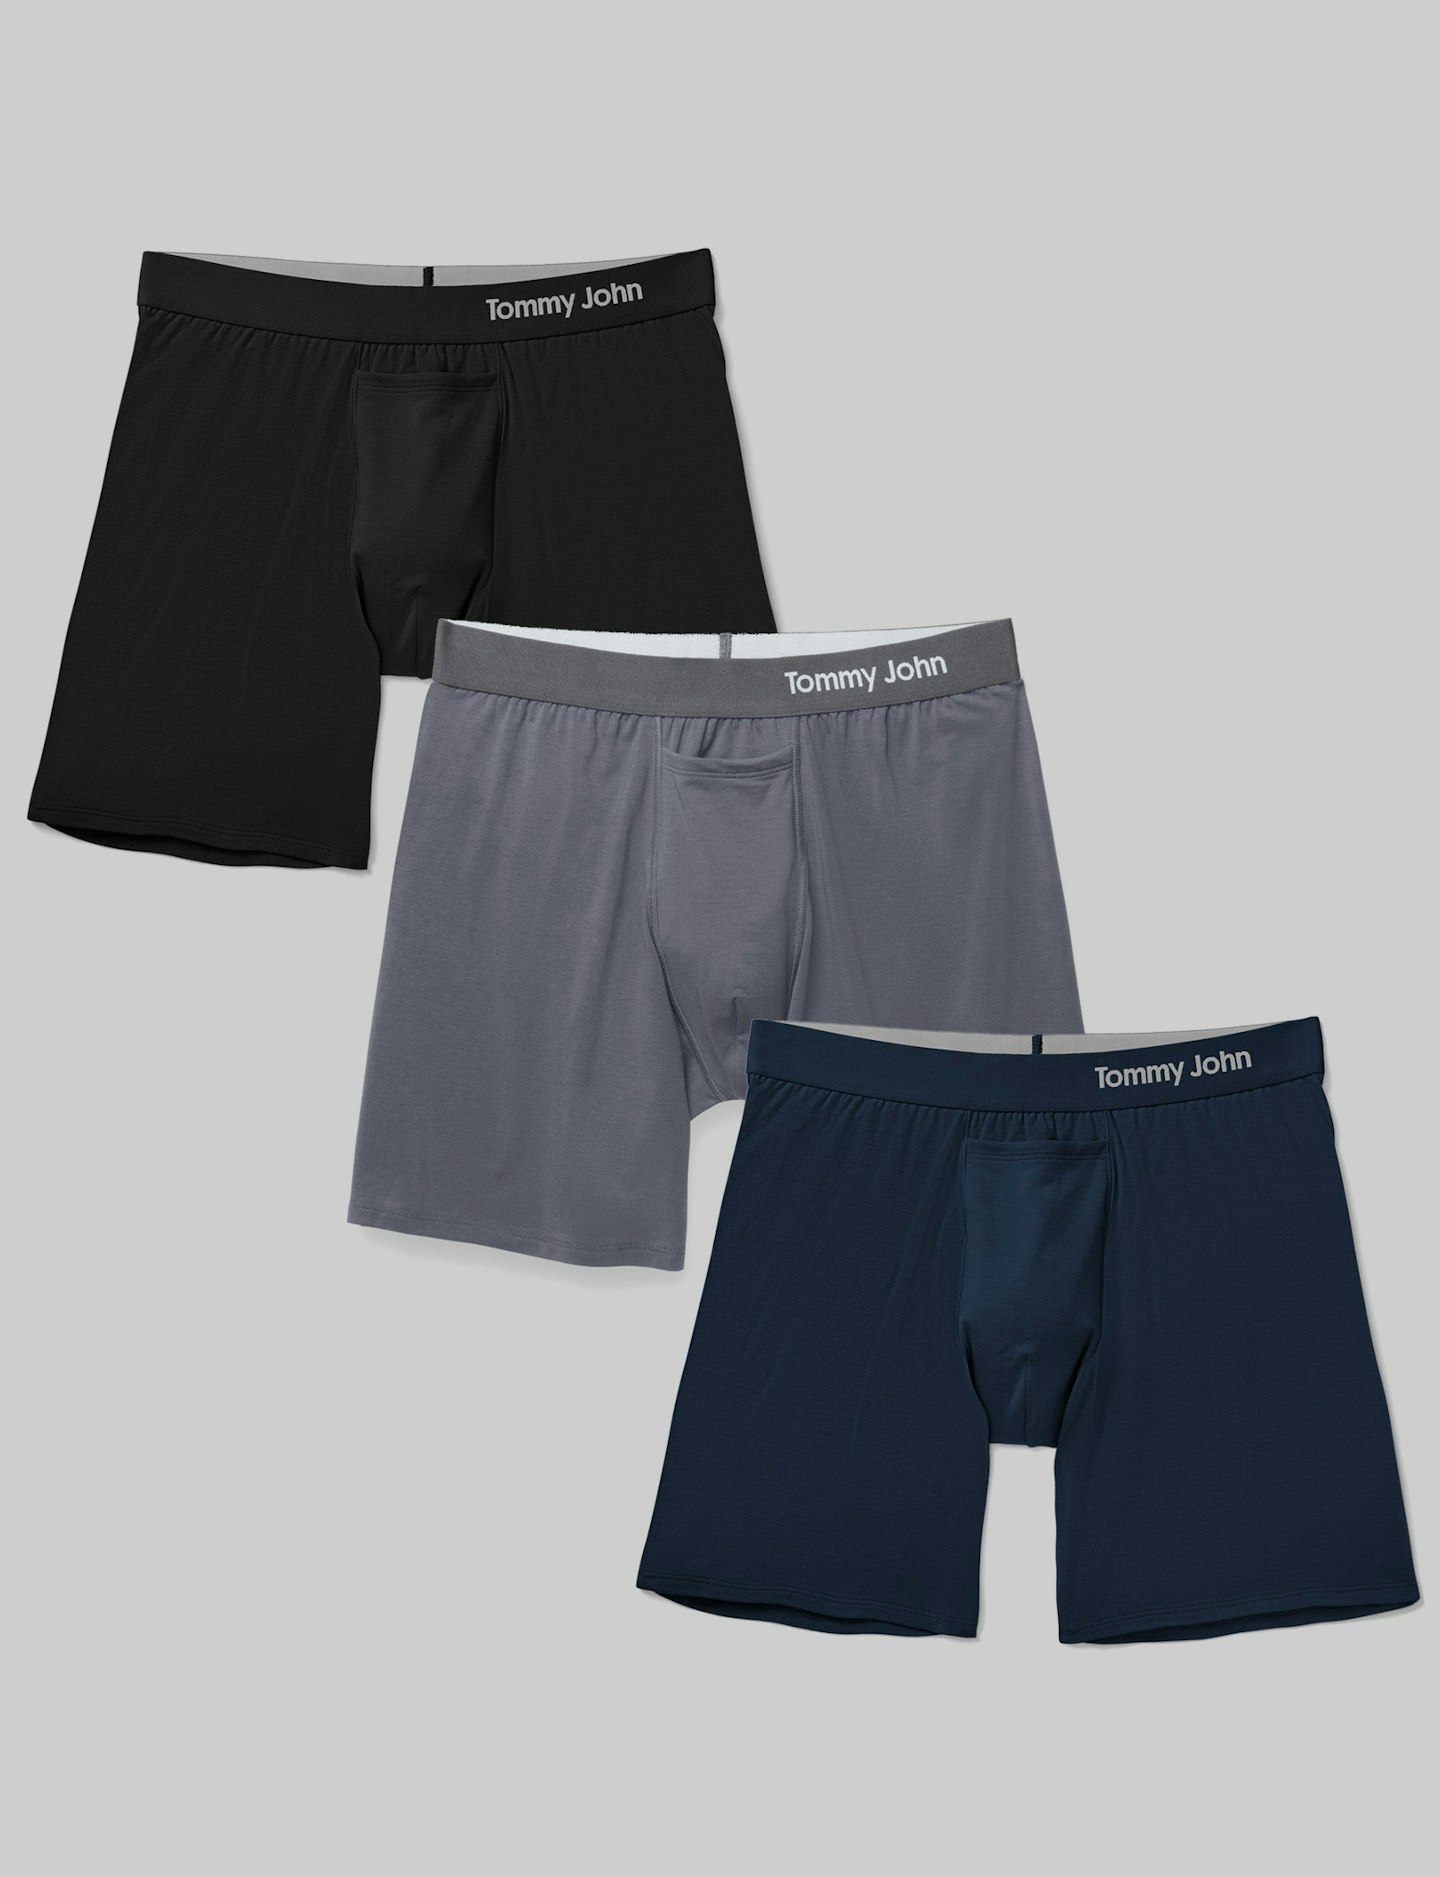 https://tjproduction.imgix.net/files/CoolCottonRelaxedFitBoxer6in_3-Pack_Black_IronGrey_Navy.jpg?w=1440&fit=crop